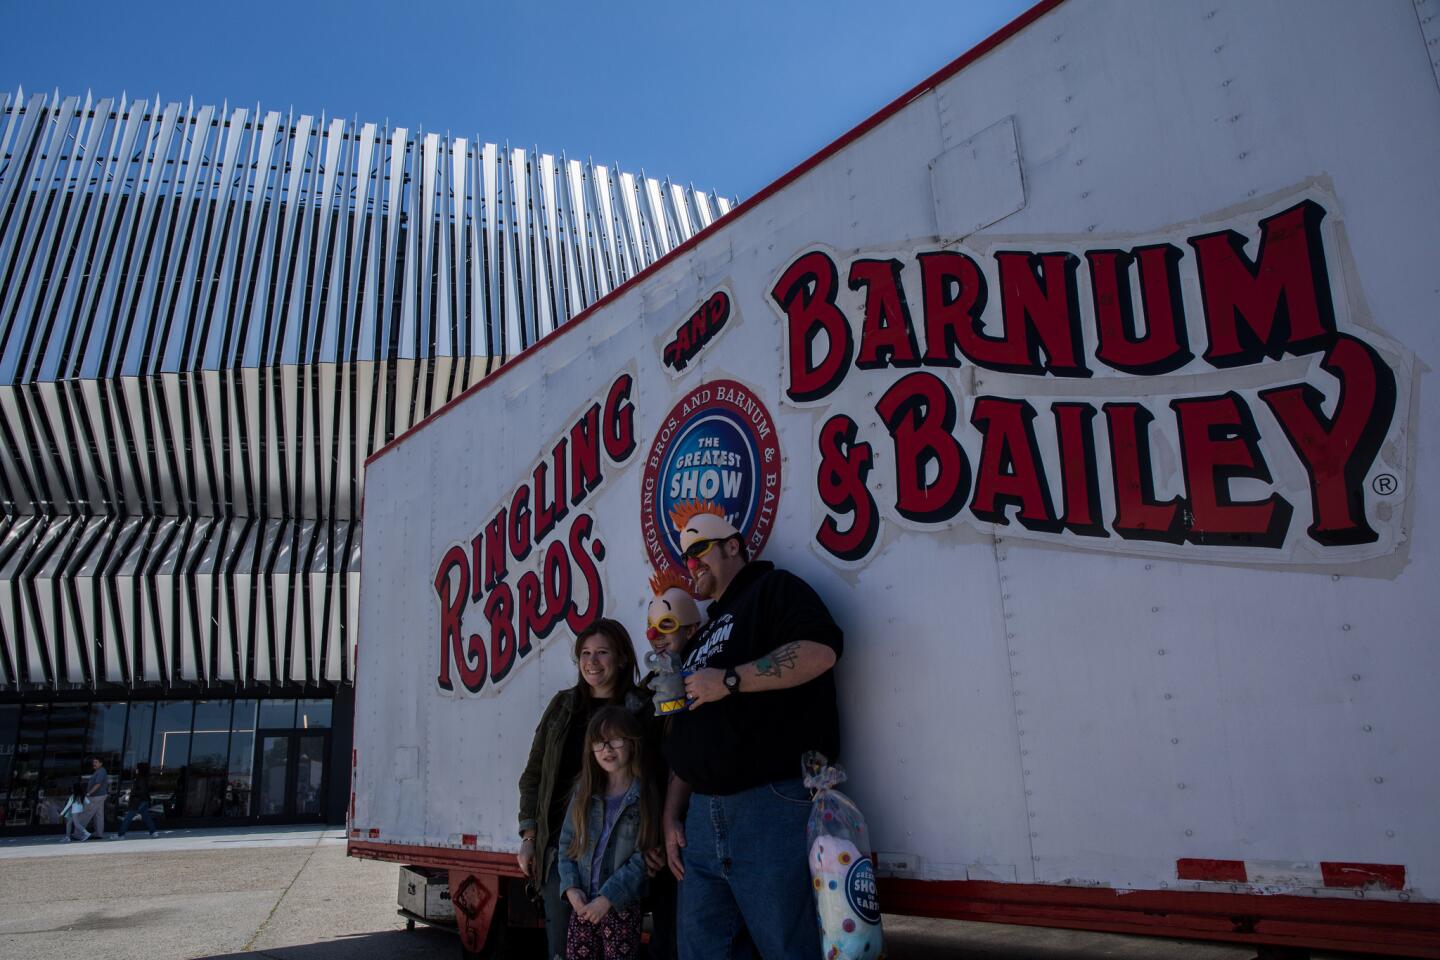 Brandon Barre with wife Kristen and kids Billy, 14, and Keira take family picture as they leave after afternoon show of the Ringling Bros. and Barnum & Bailey Circus at the Nassau Coliseum on Long Island in Uniondale, New York.